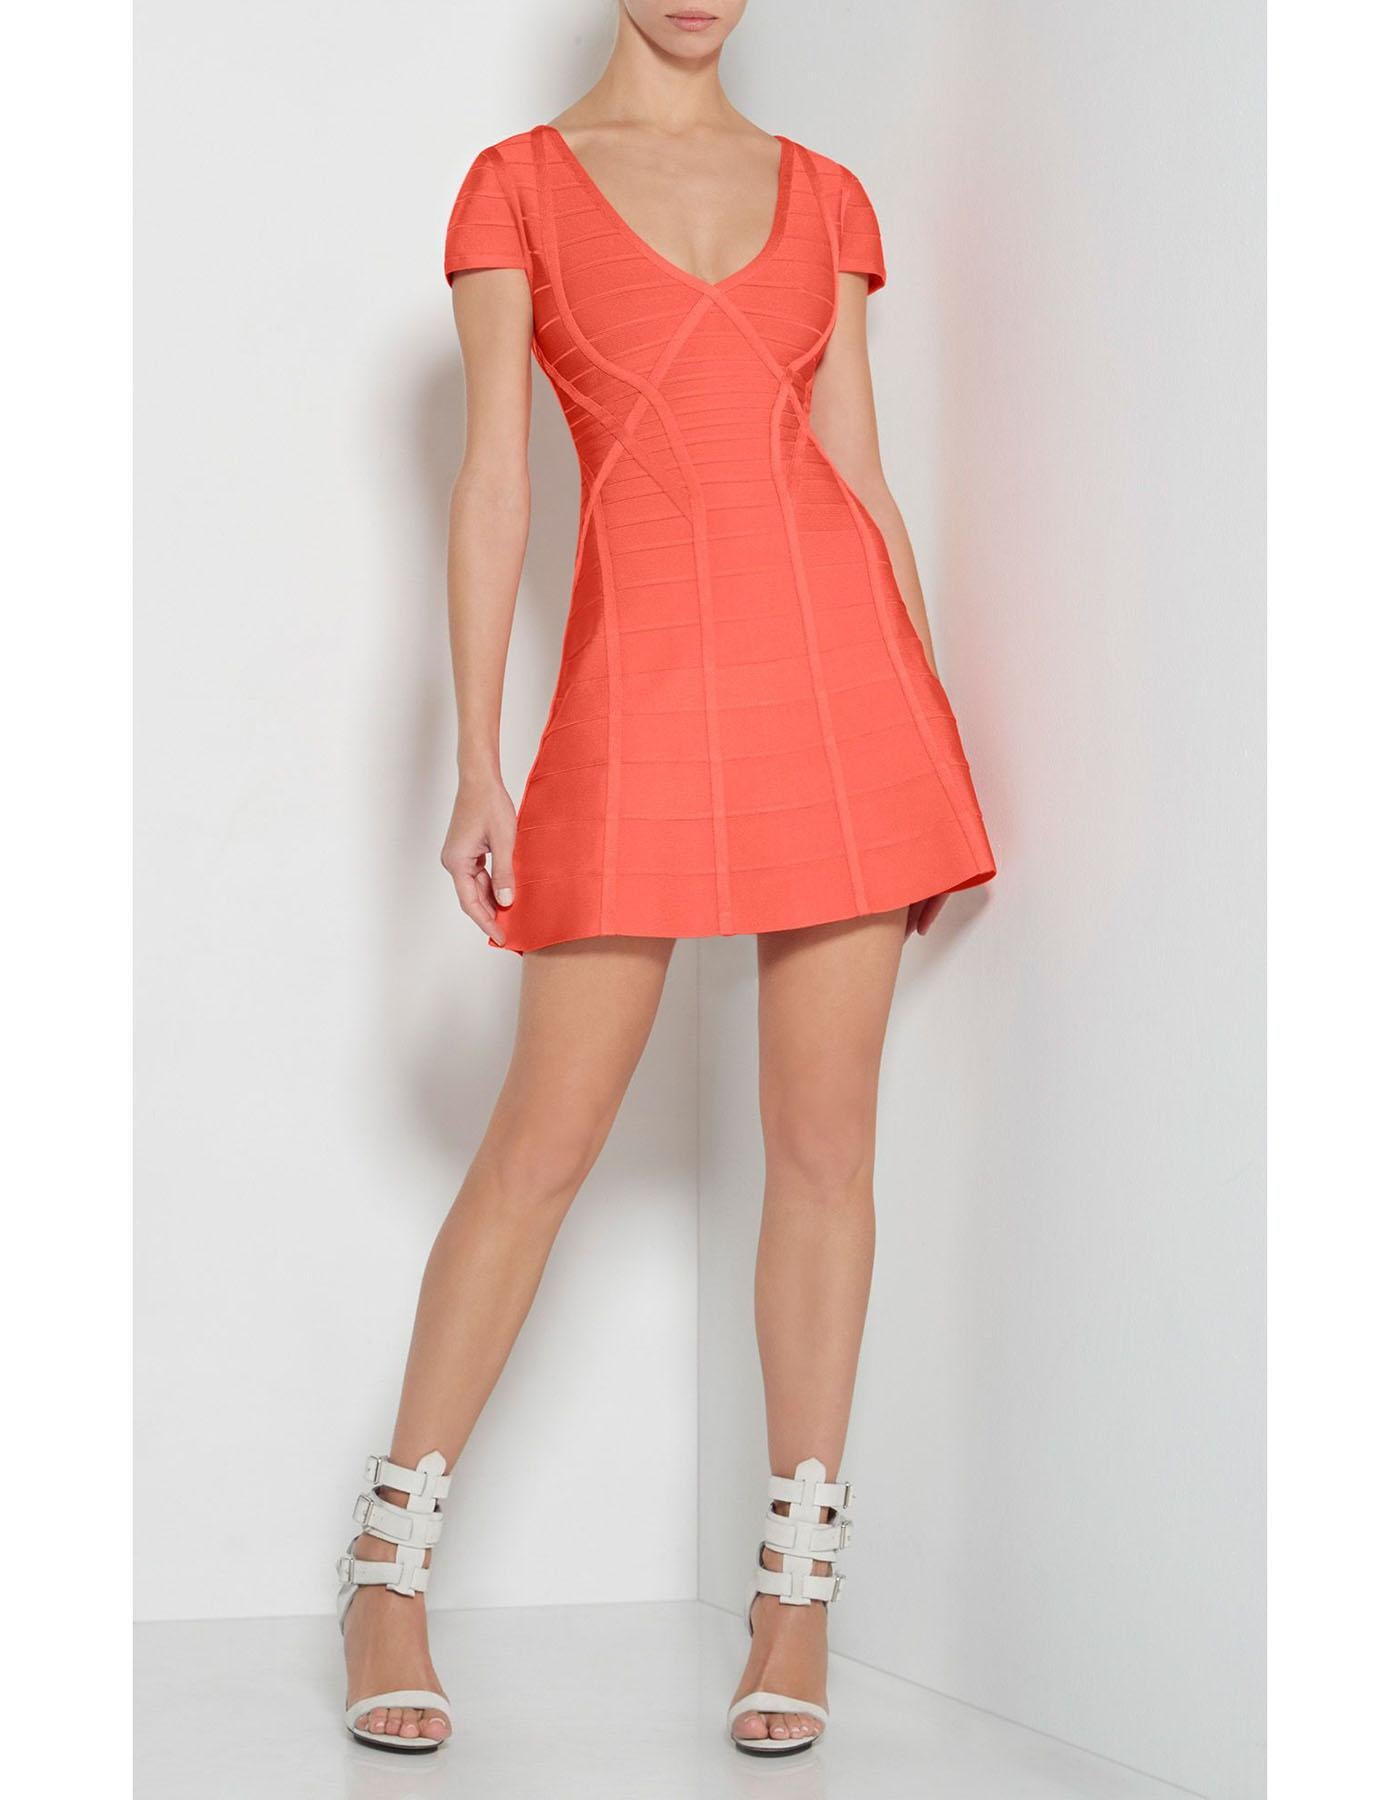 Herve Leger Sunburst Simona Bandage Flare Dress Sz XS

Features cut-outs at back

Made In: China
Color: Orange
Composition: 90% Rayon, 9% nylon, 1% spandex
Lining: None
Closure/Opening: Zip closure at back
Overall Condition: Excellent pre-owned